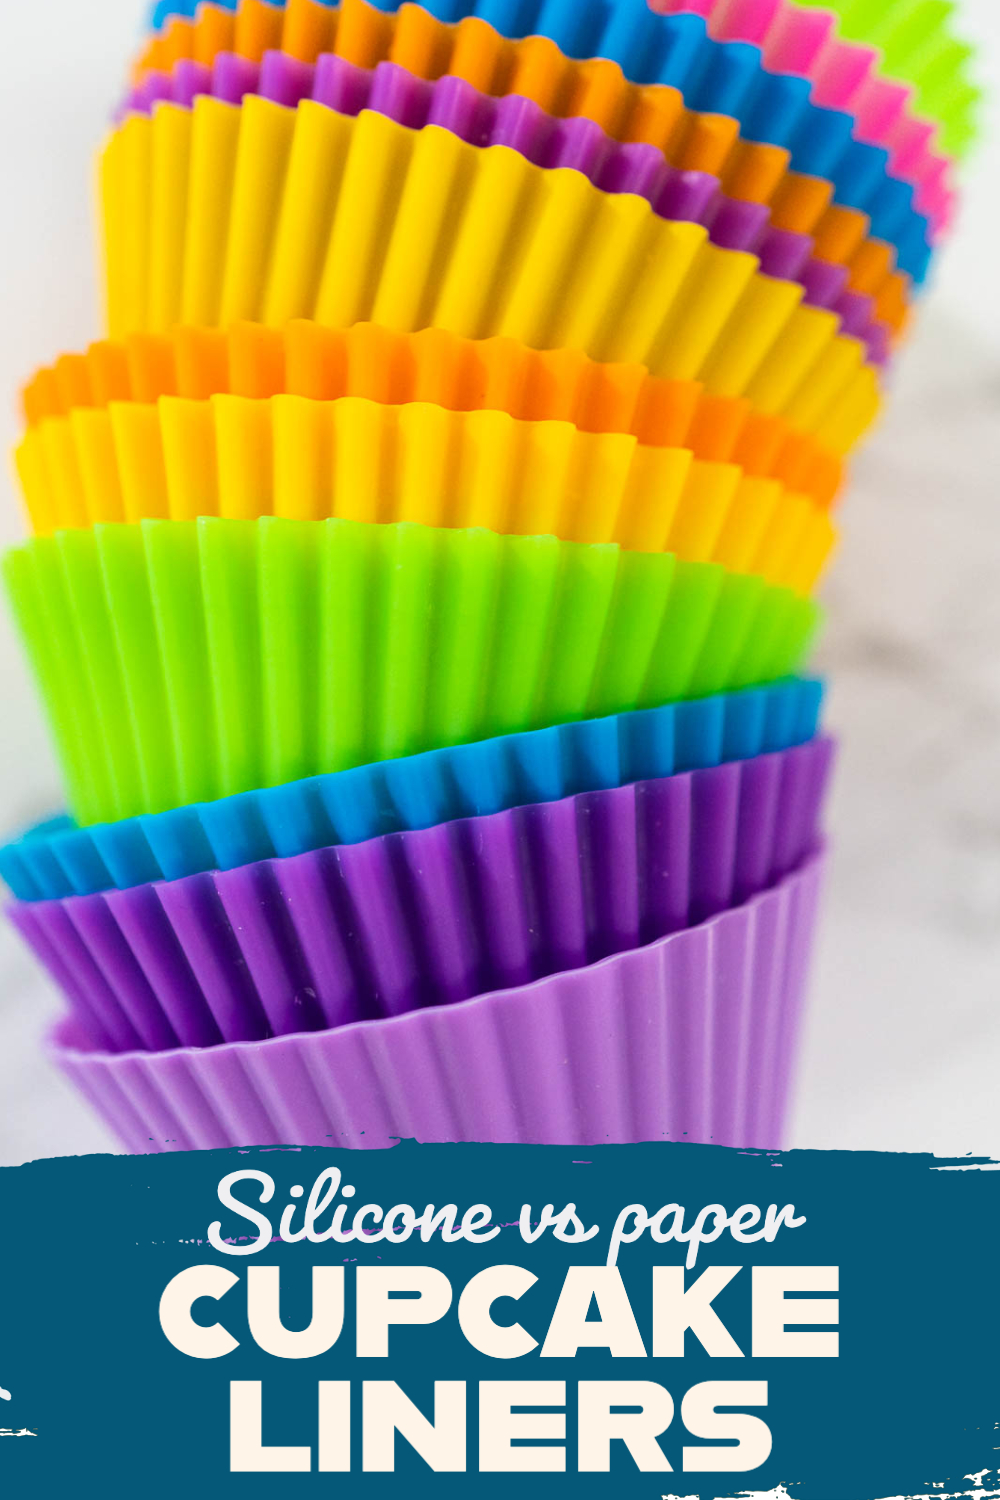 Silicone vs paper cupcake liners